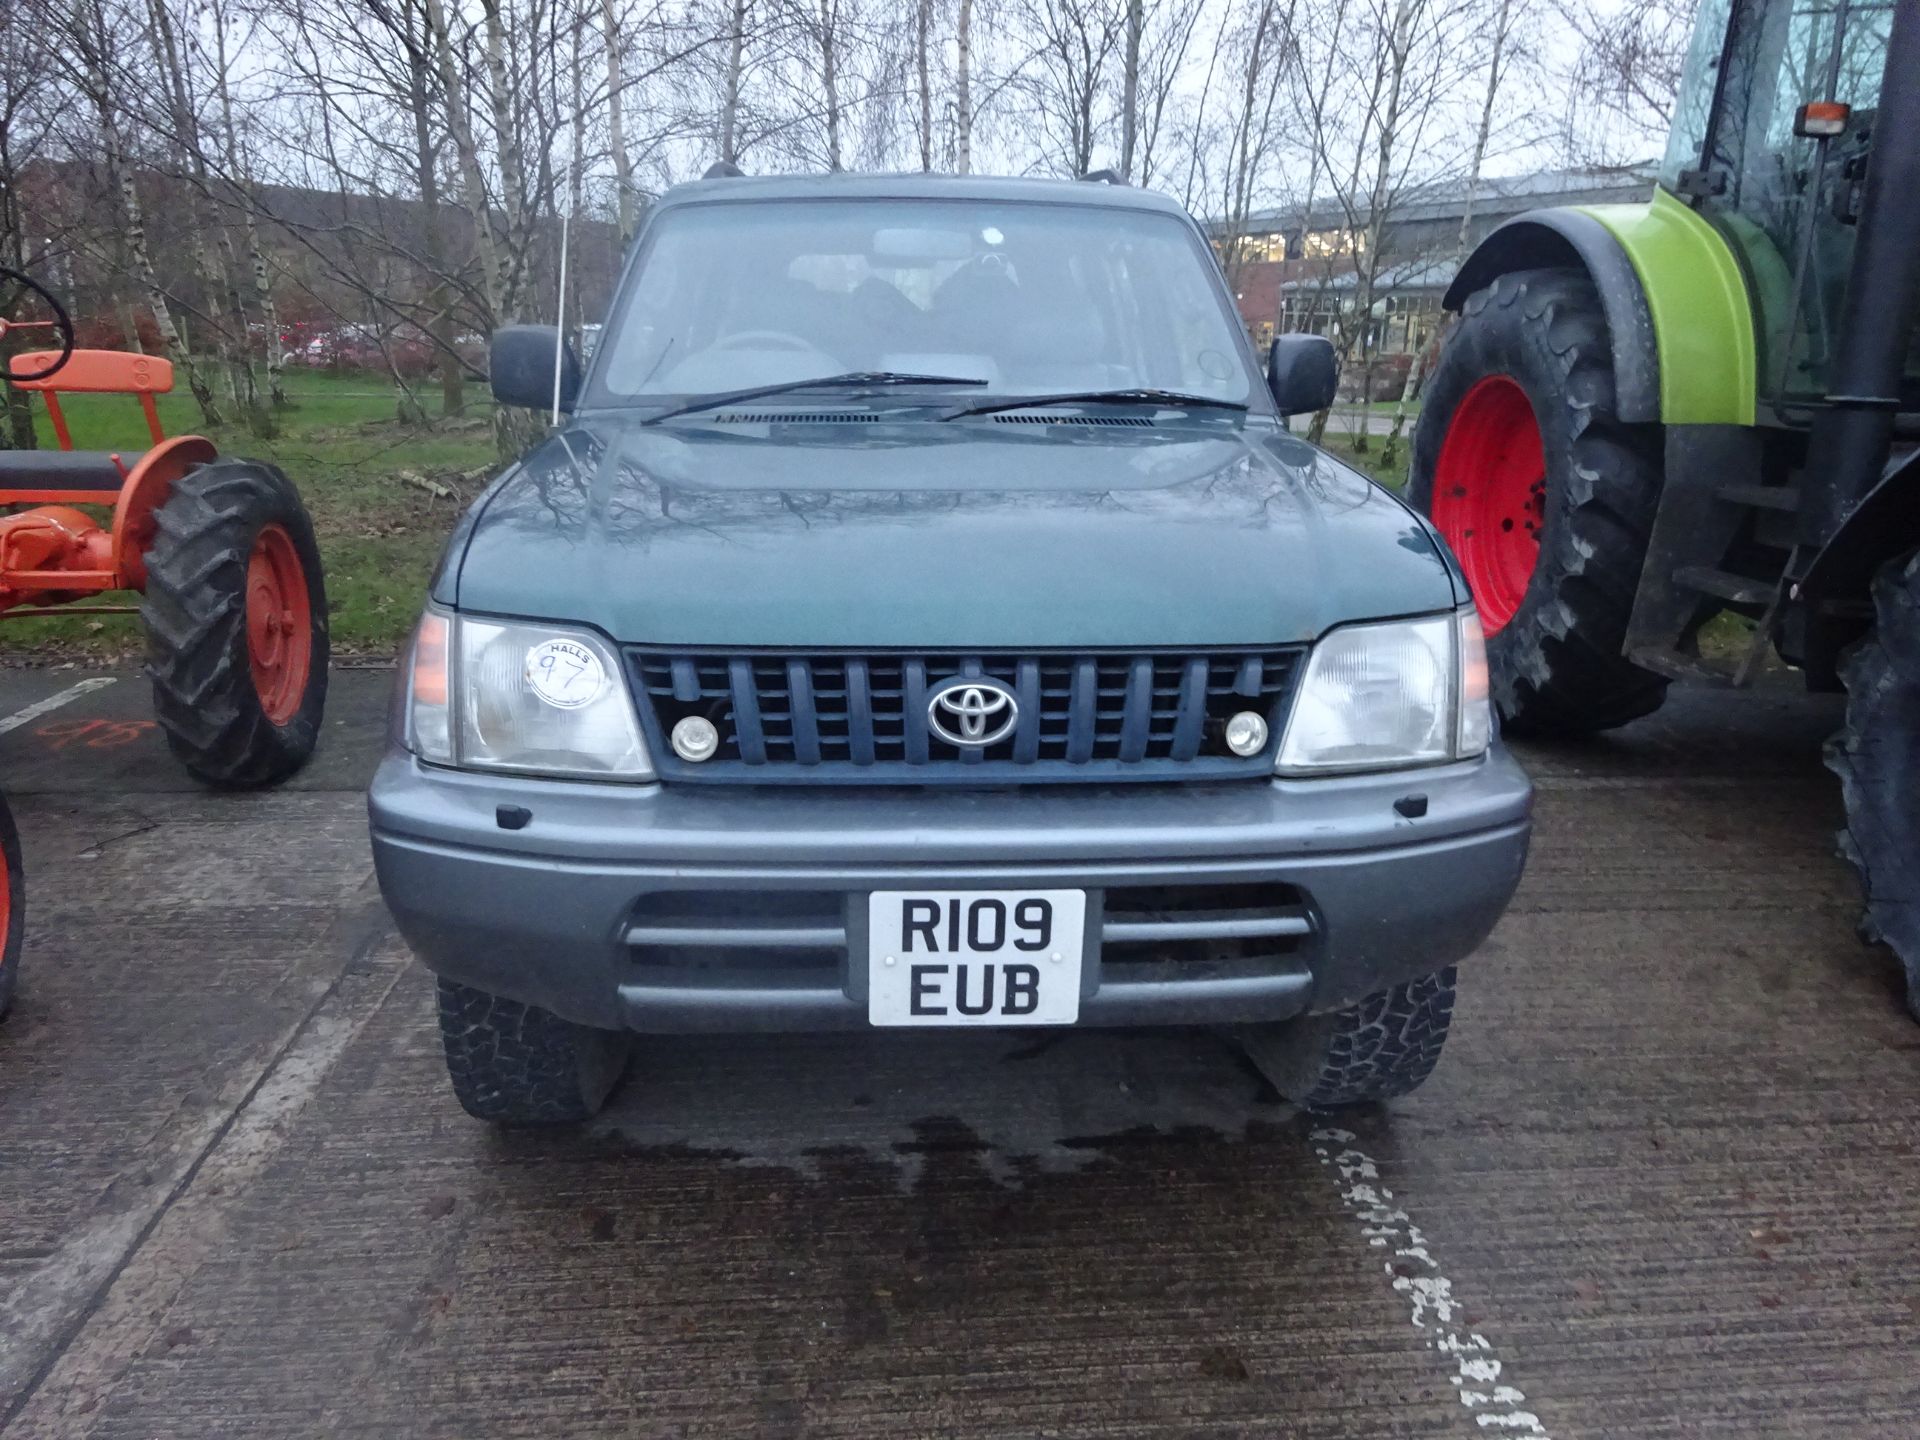 TOYOTA LAND CRUISER 32 YEARS OLD MOT JUNE 2021 - OFF ROAD AND ROAD TYRES - REGISTRATION R109 EUB - Image 3 of 3